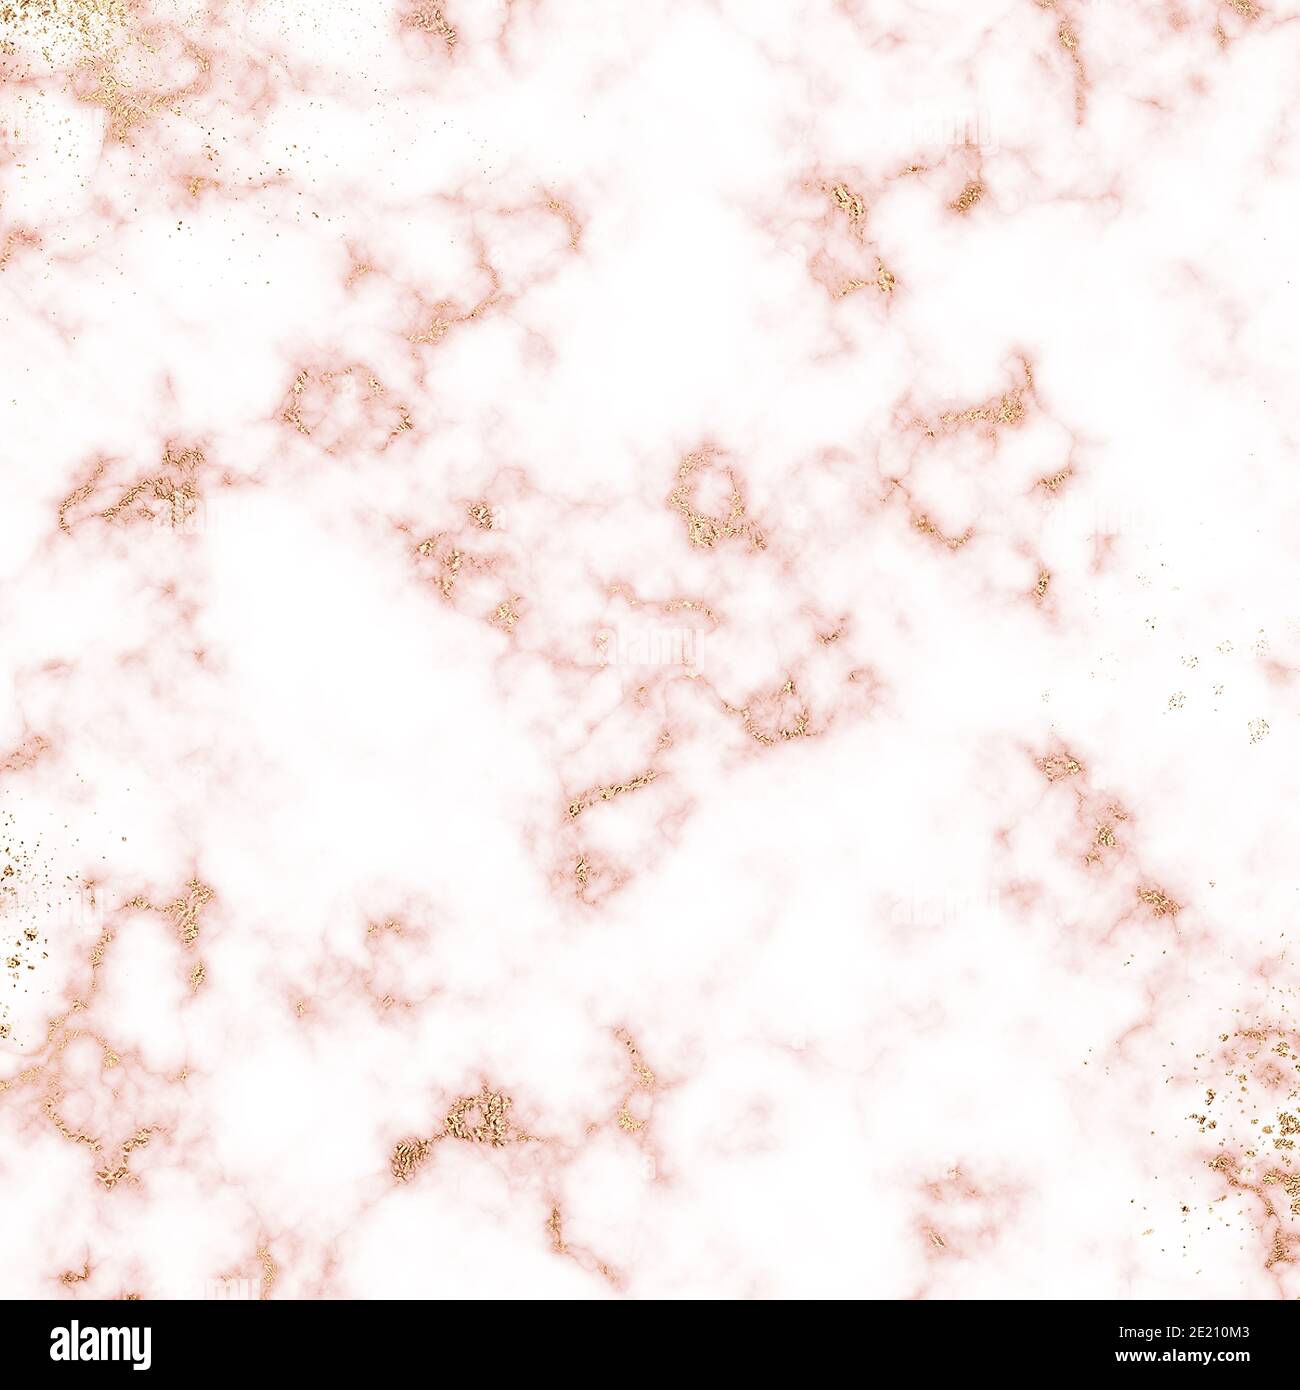 Background Abstract Light Pink Glitter Sparkle Stock Photo 750382009